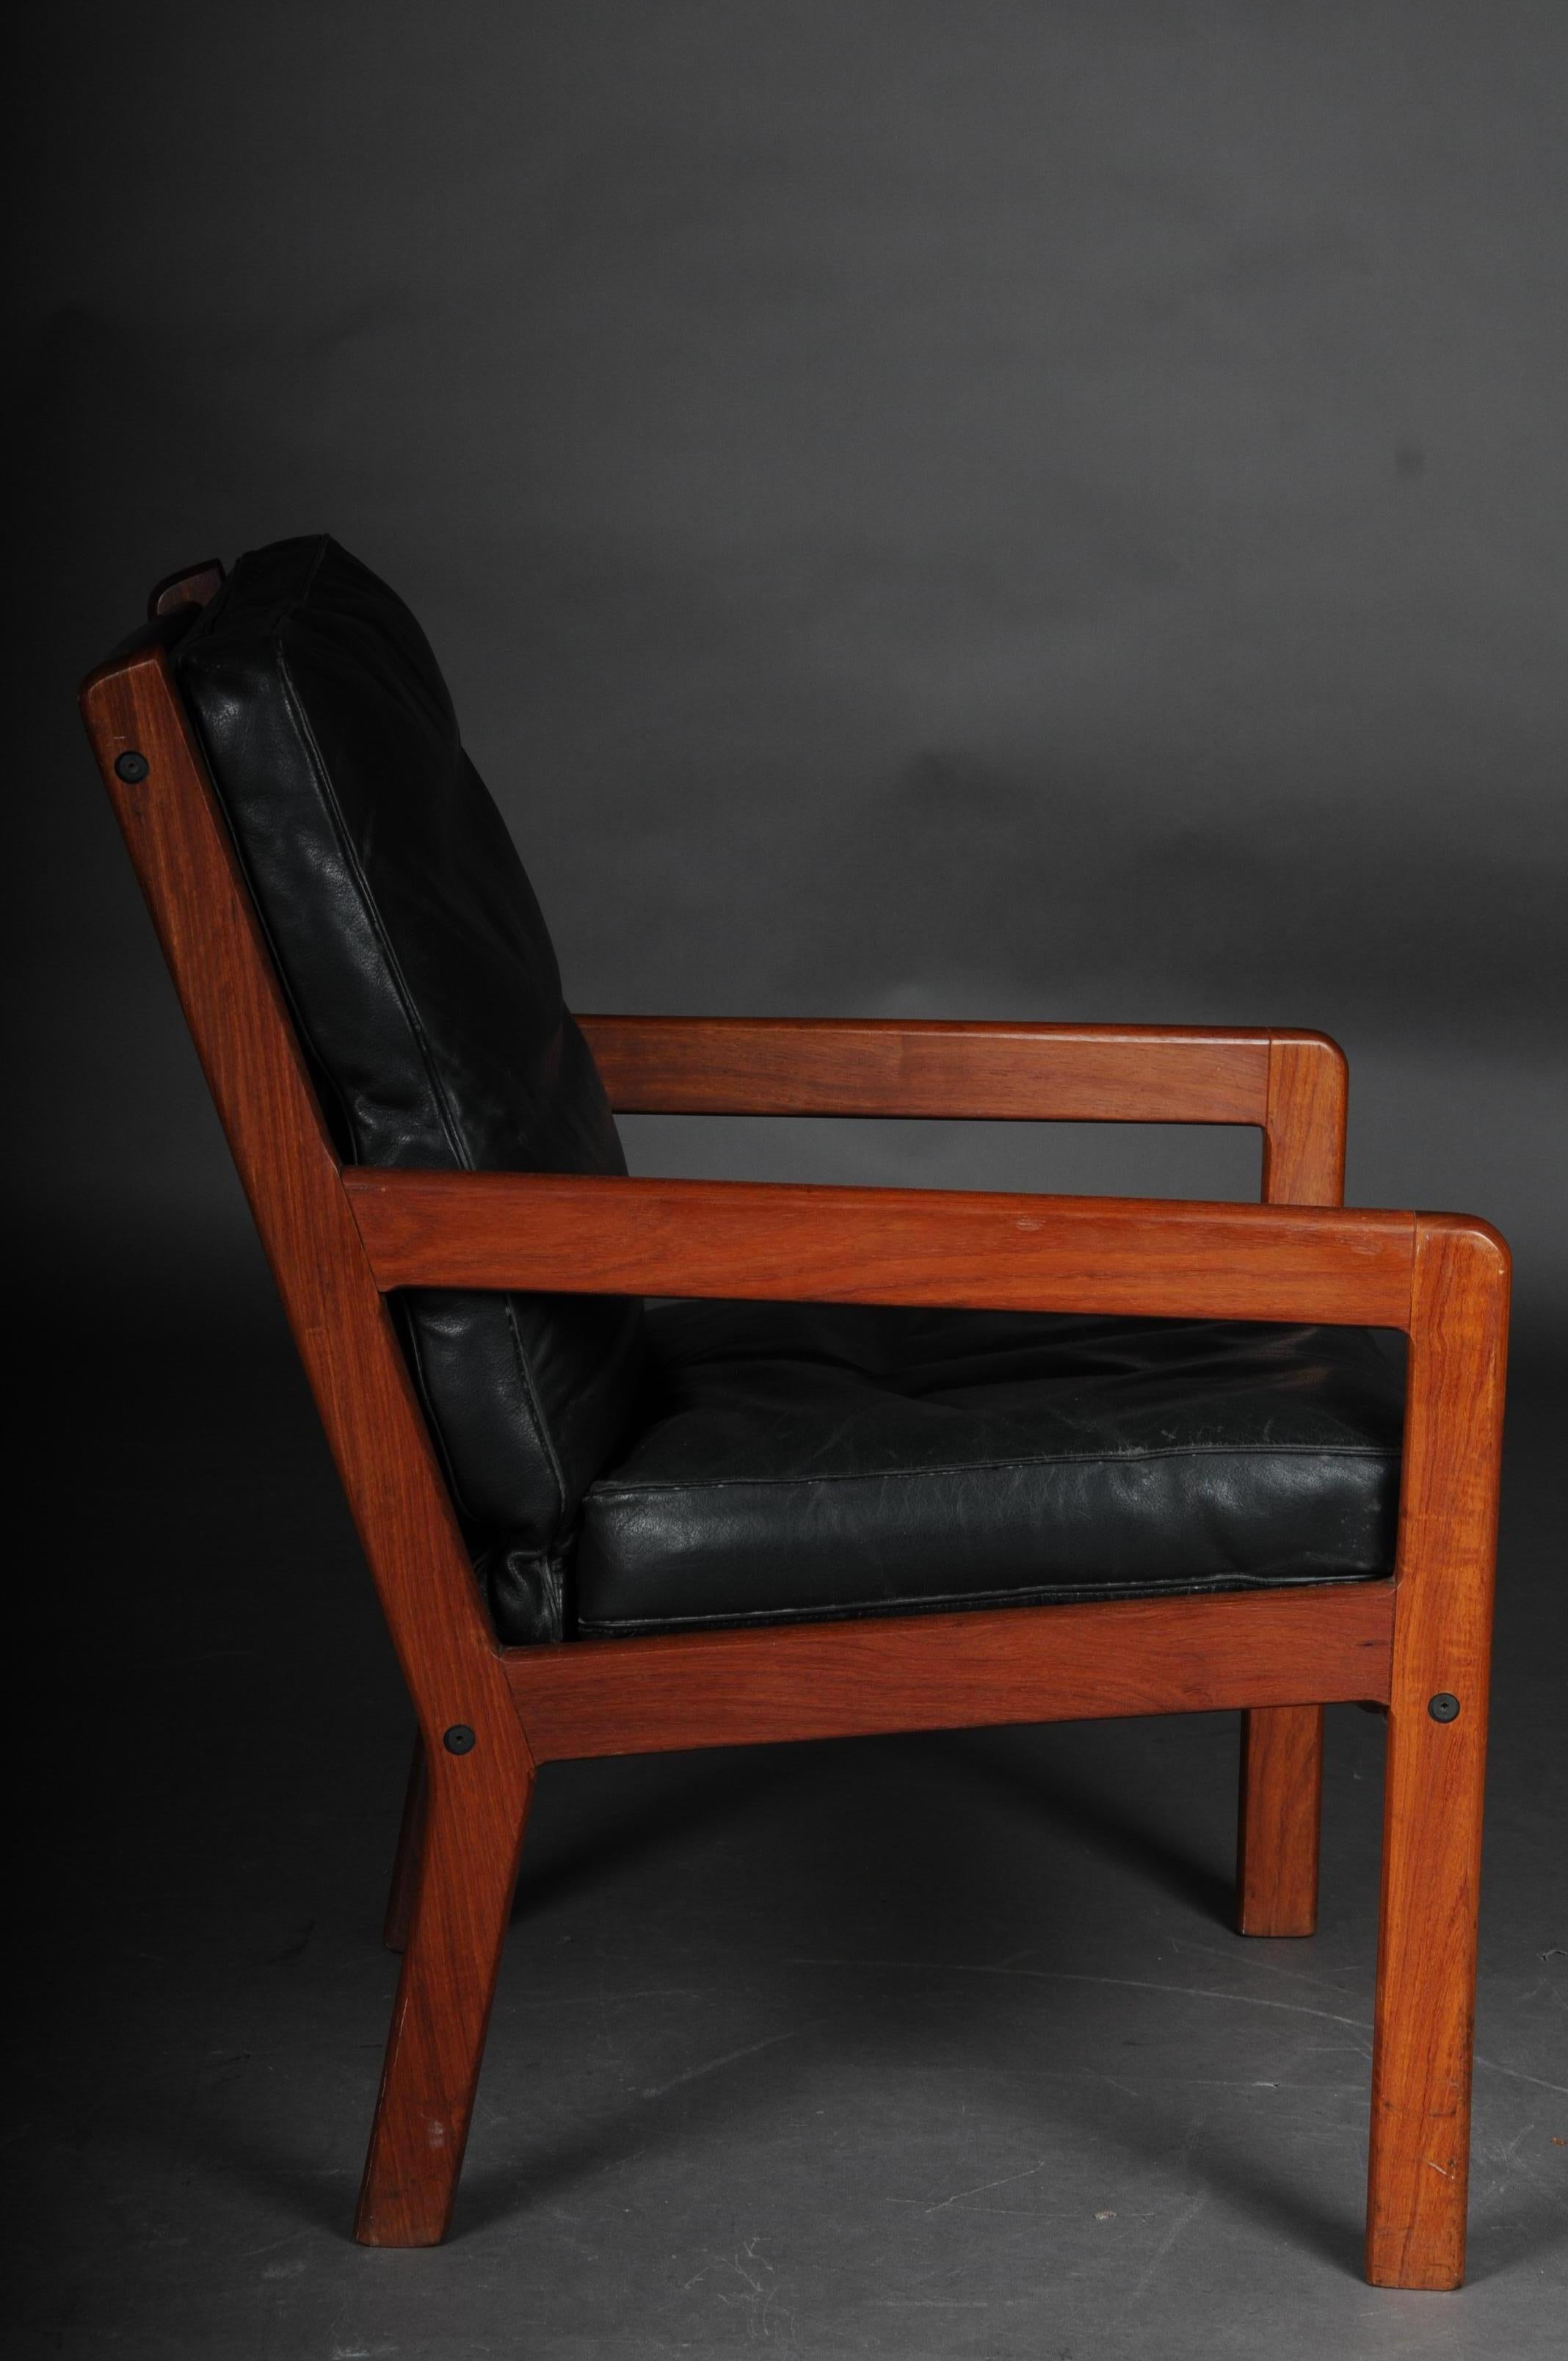 Leather Pair of Vintage Teak Armchairs, Chairs, 1960s-1970s, Danish